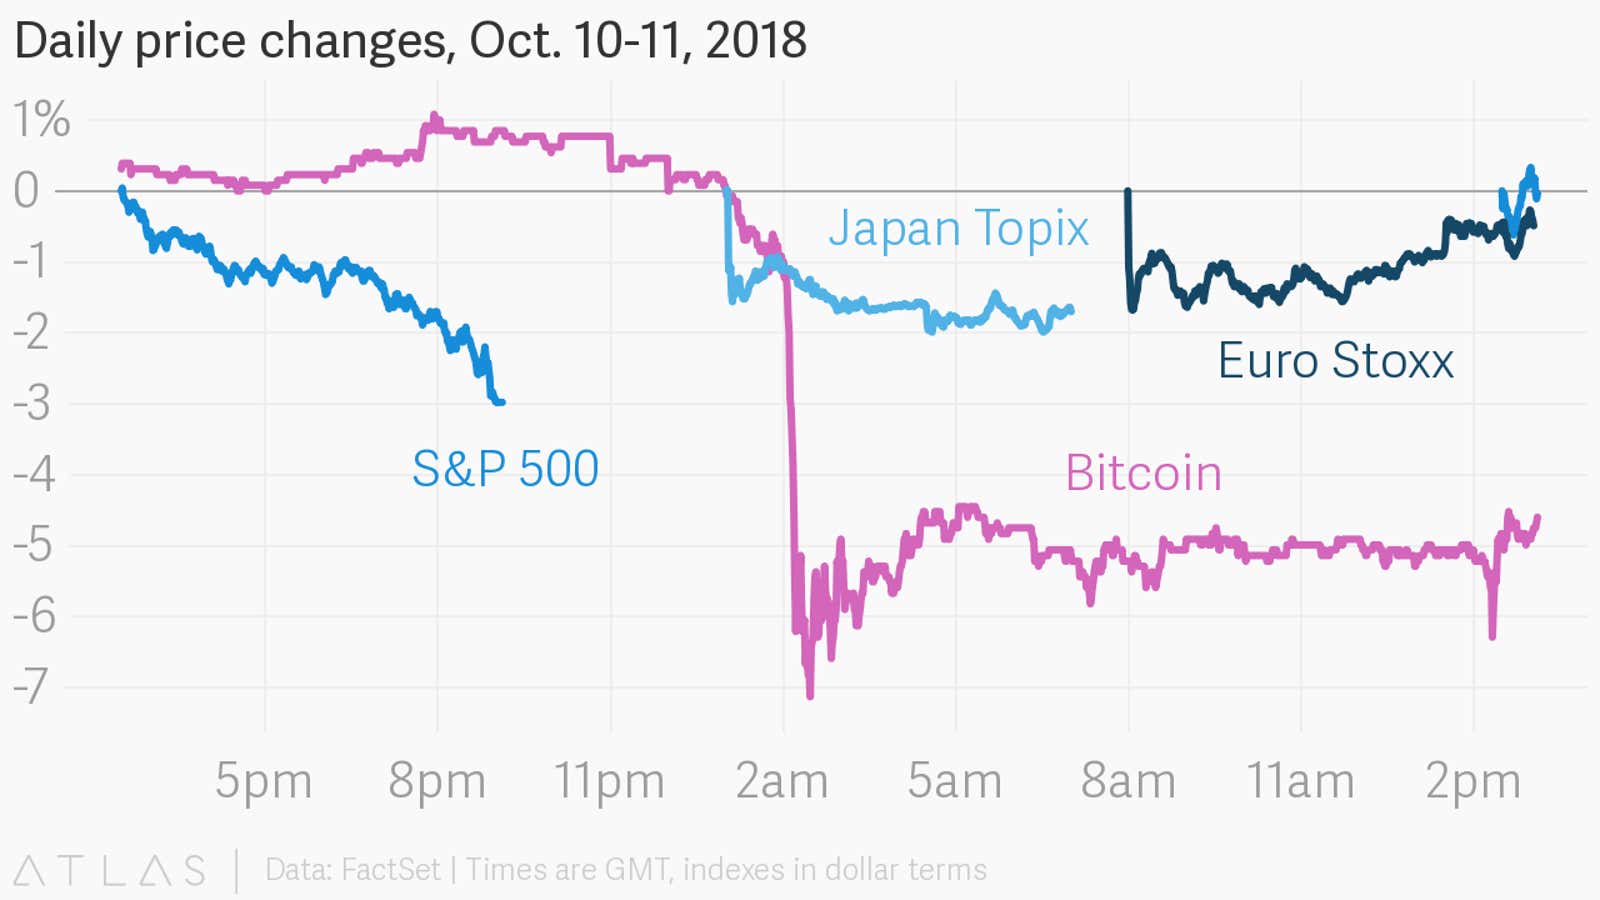 Stocks have been hit hard, but crypto has been hit even harder